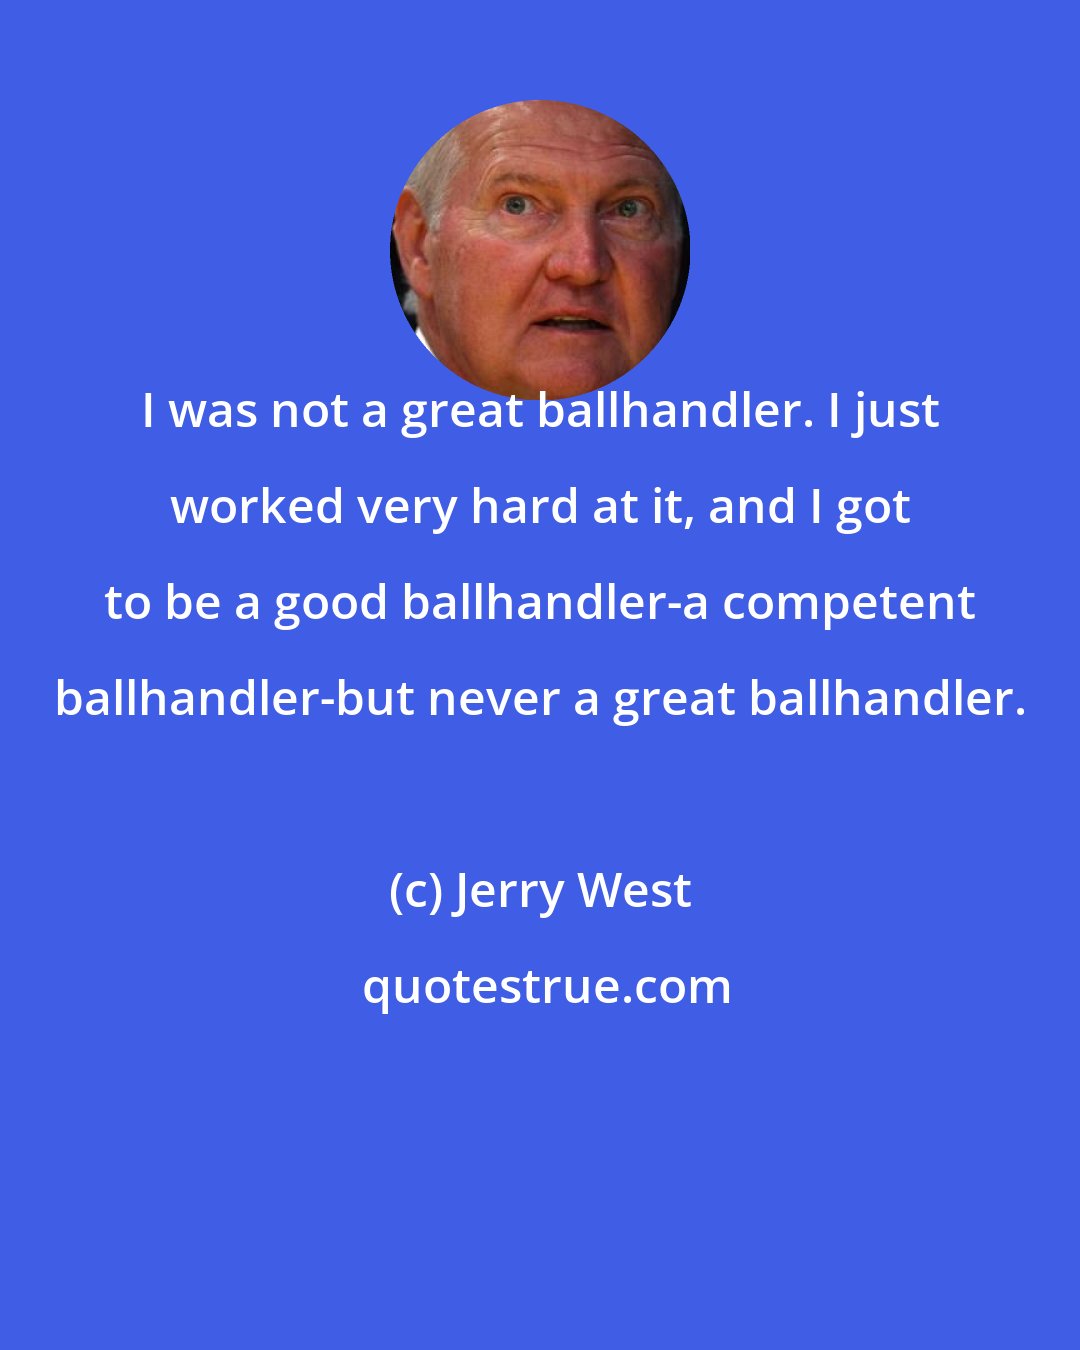 Jerry West: I was not a great ballhandler. I just worked very hard at it, and I got to be a good ballhandler-a competent ballhandler-but never a great ballhandler.